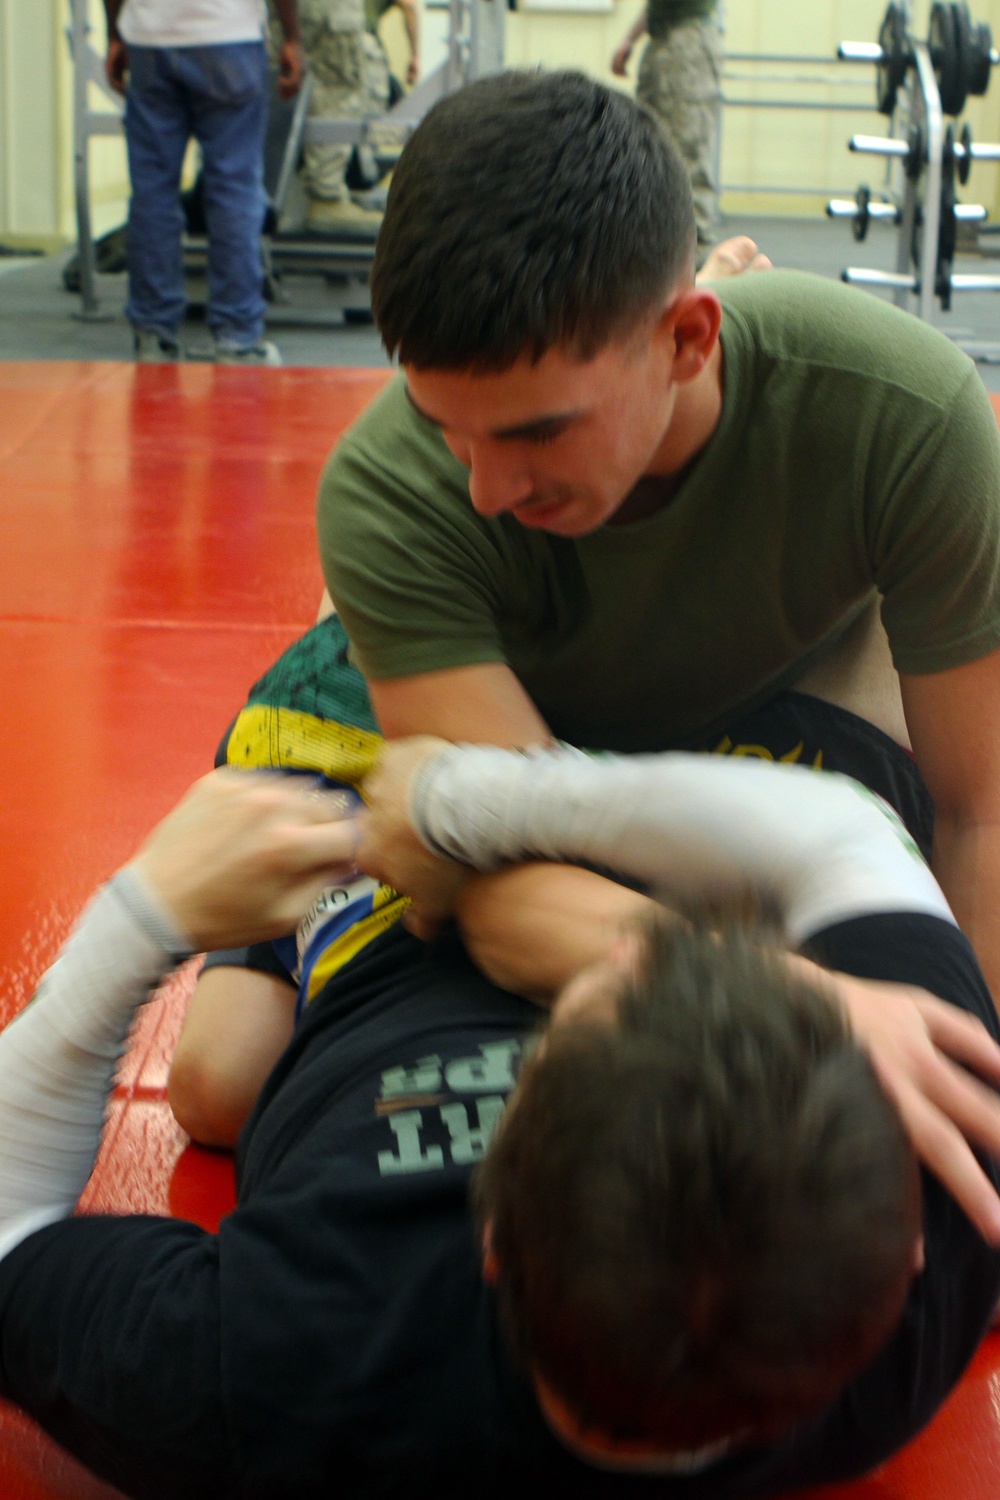 Marines, civilians connect through armbars and choke holds